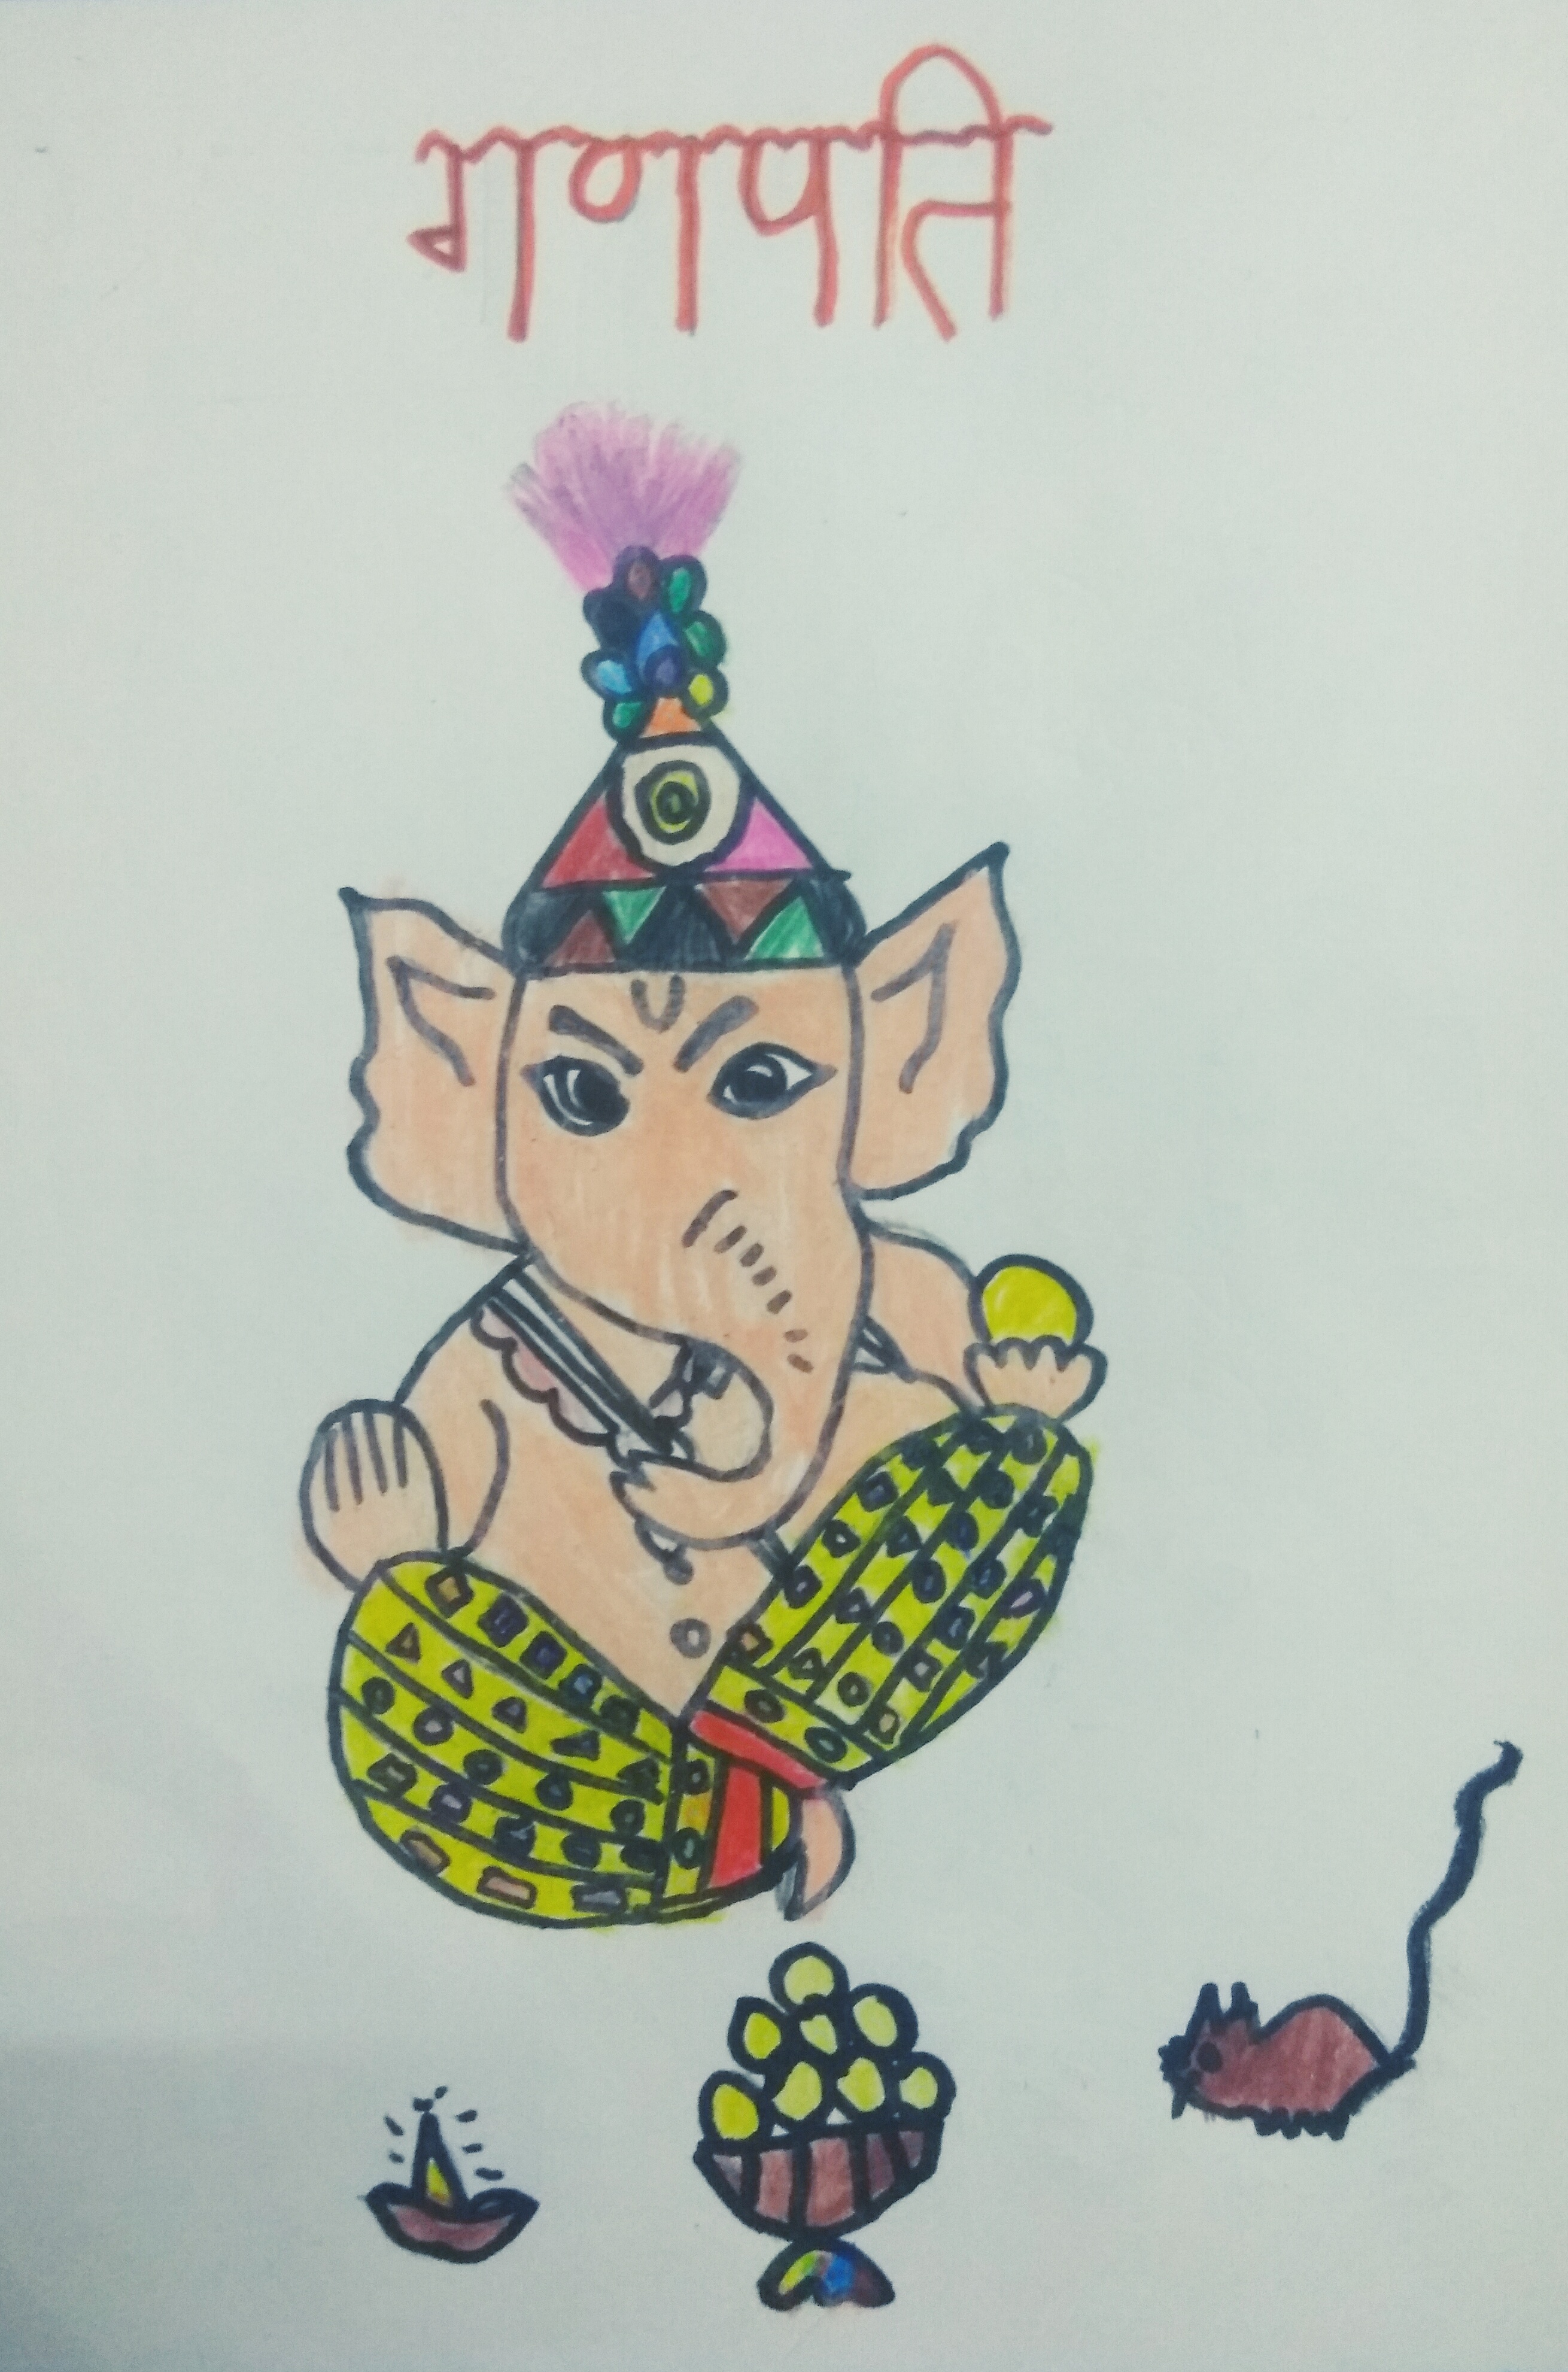 Entries of all participants of Ganesh Chaturthi painting competition  /contest